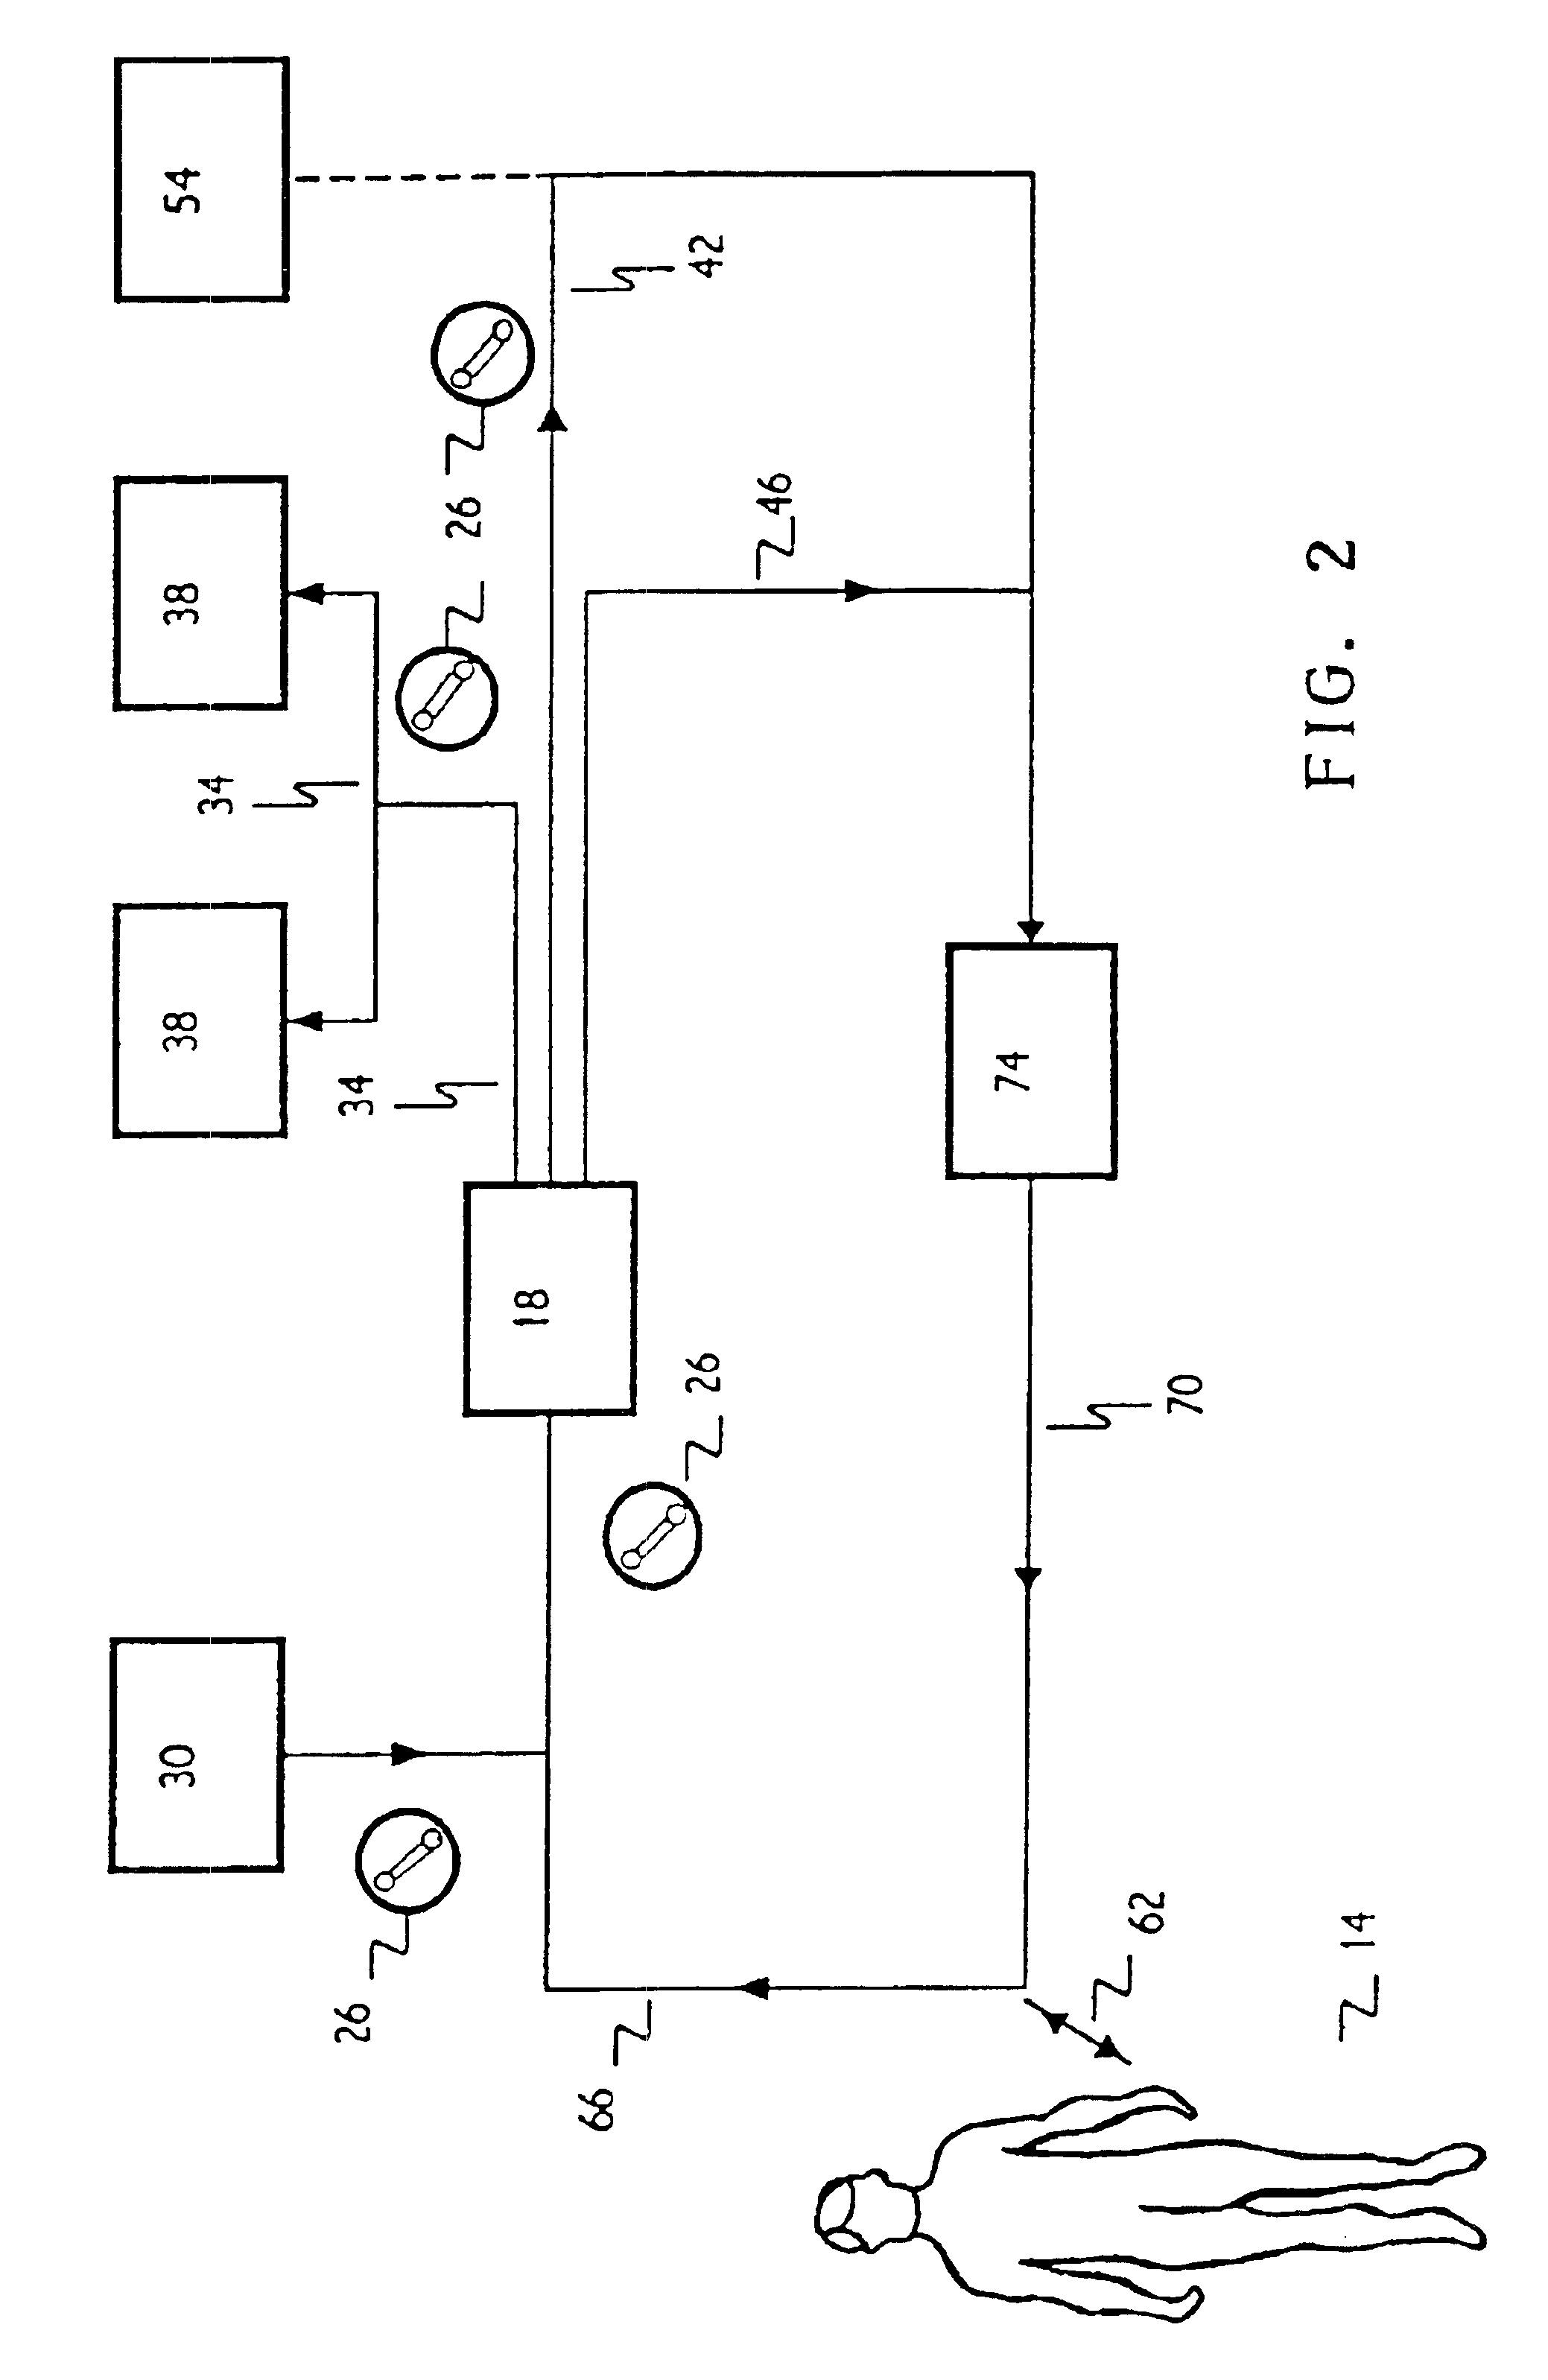 Apparatus for producing blood component products